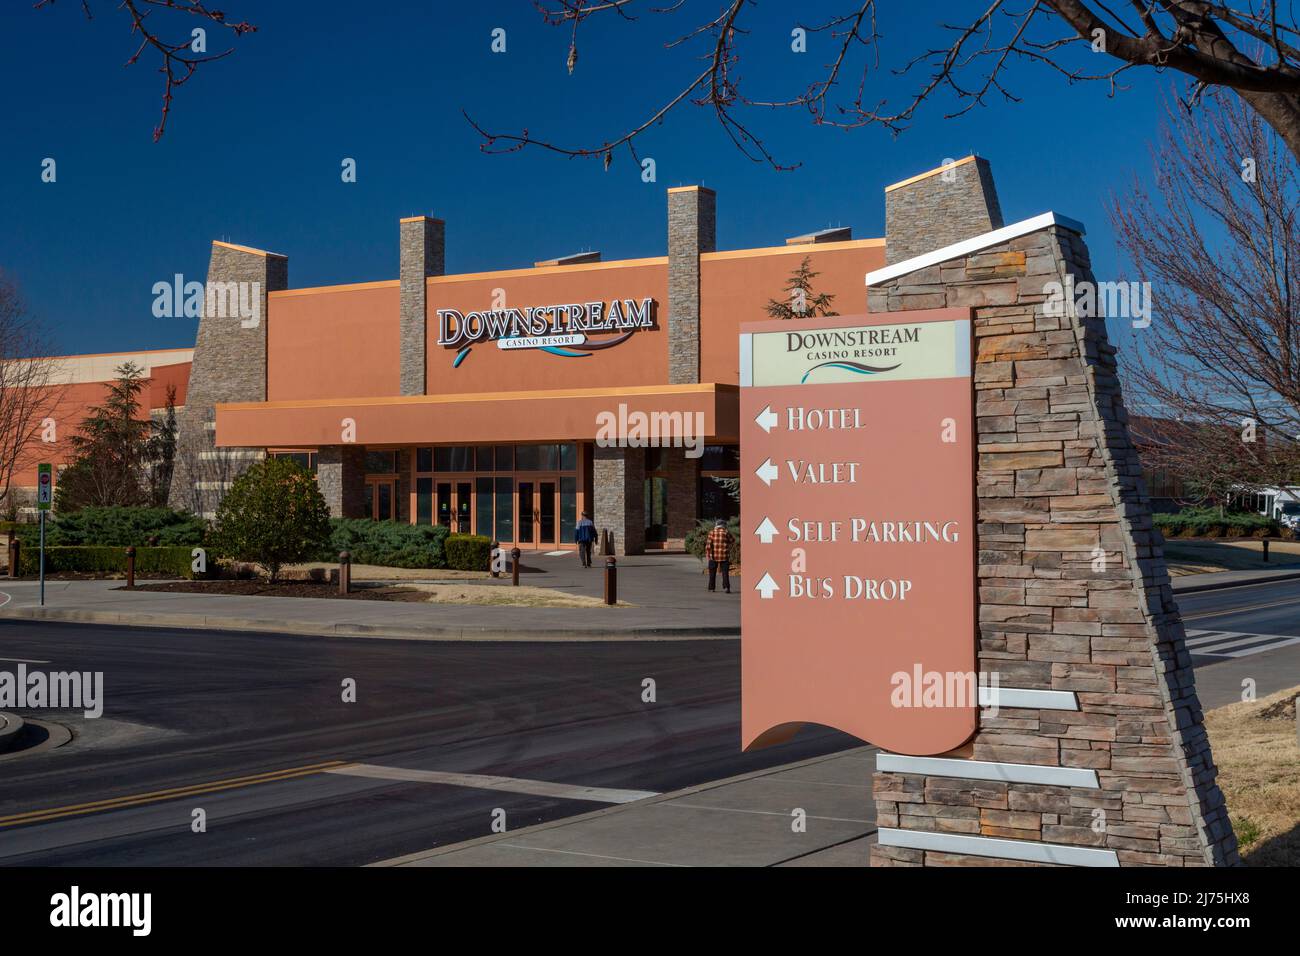 Quapaw, Oklahoma - The Downstream Casino Resort, owned by the Quapaw Nation of Native Americans. Stock Photo